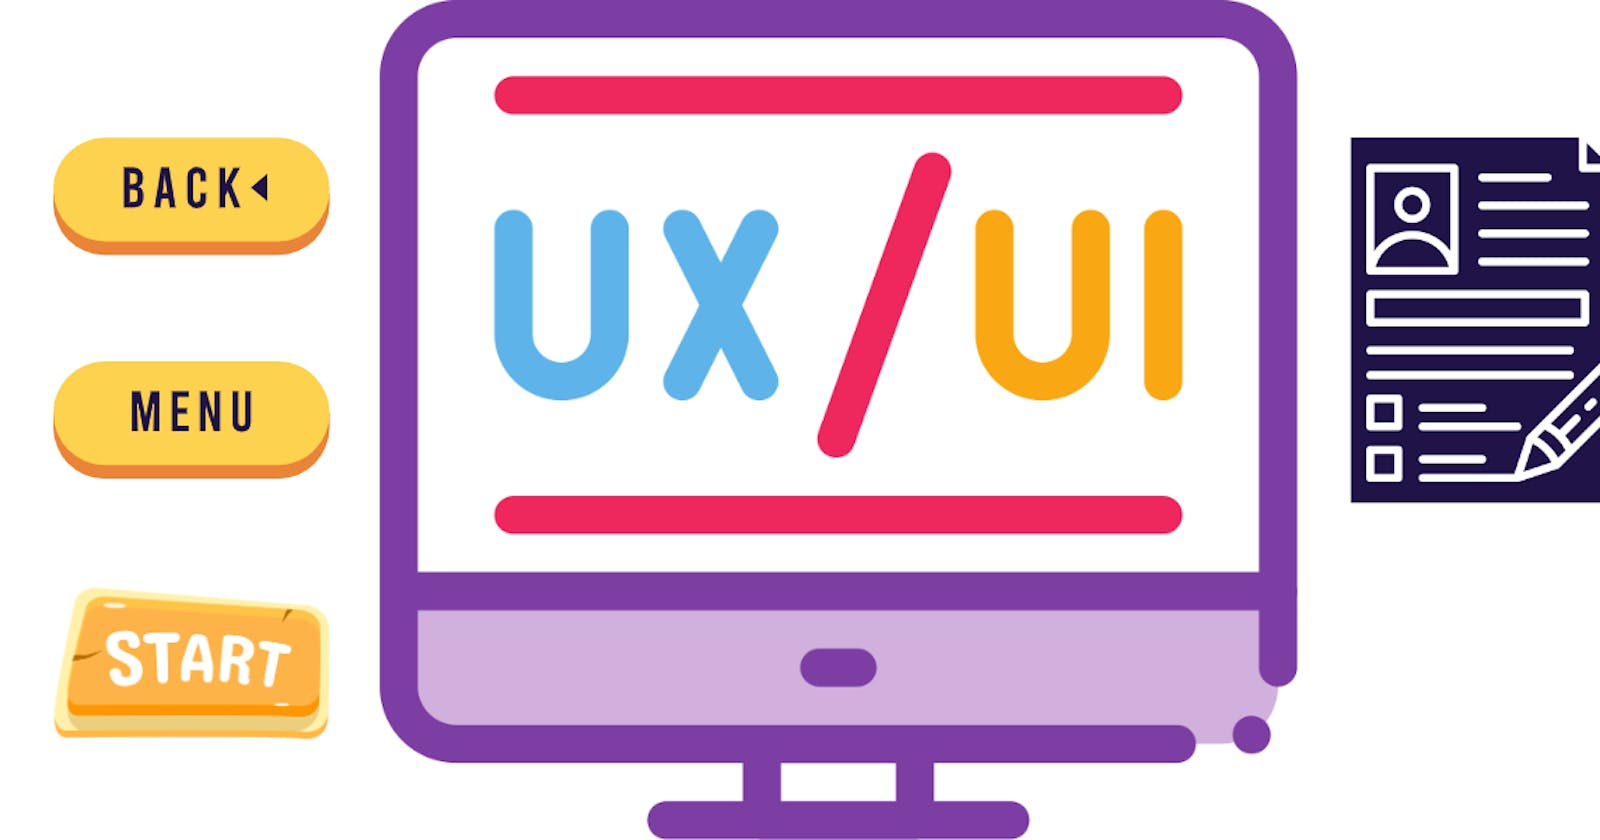 What is UI and UX?